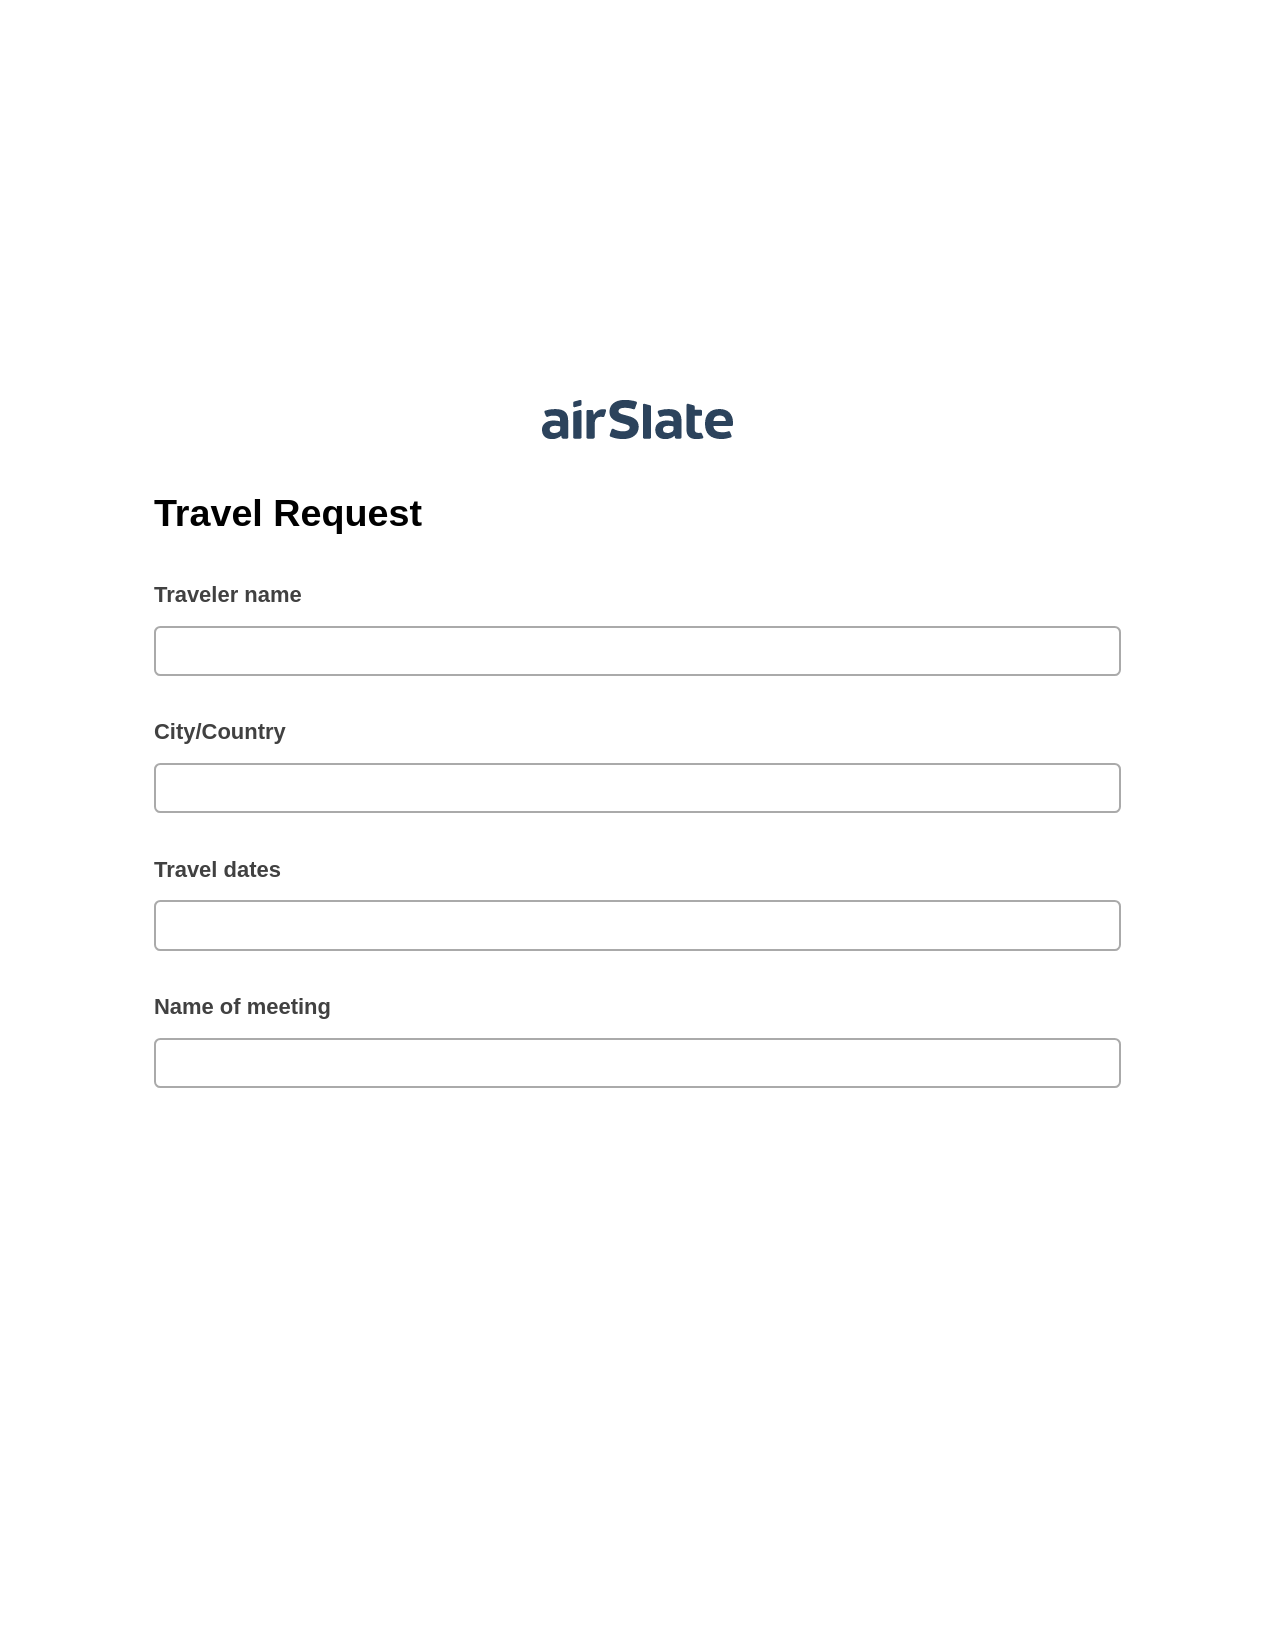 Travel Request Pre-fill from Google Sheets Bot, Create slate addon, Export to Excel 365 Bot